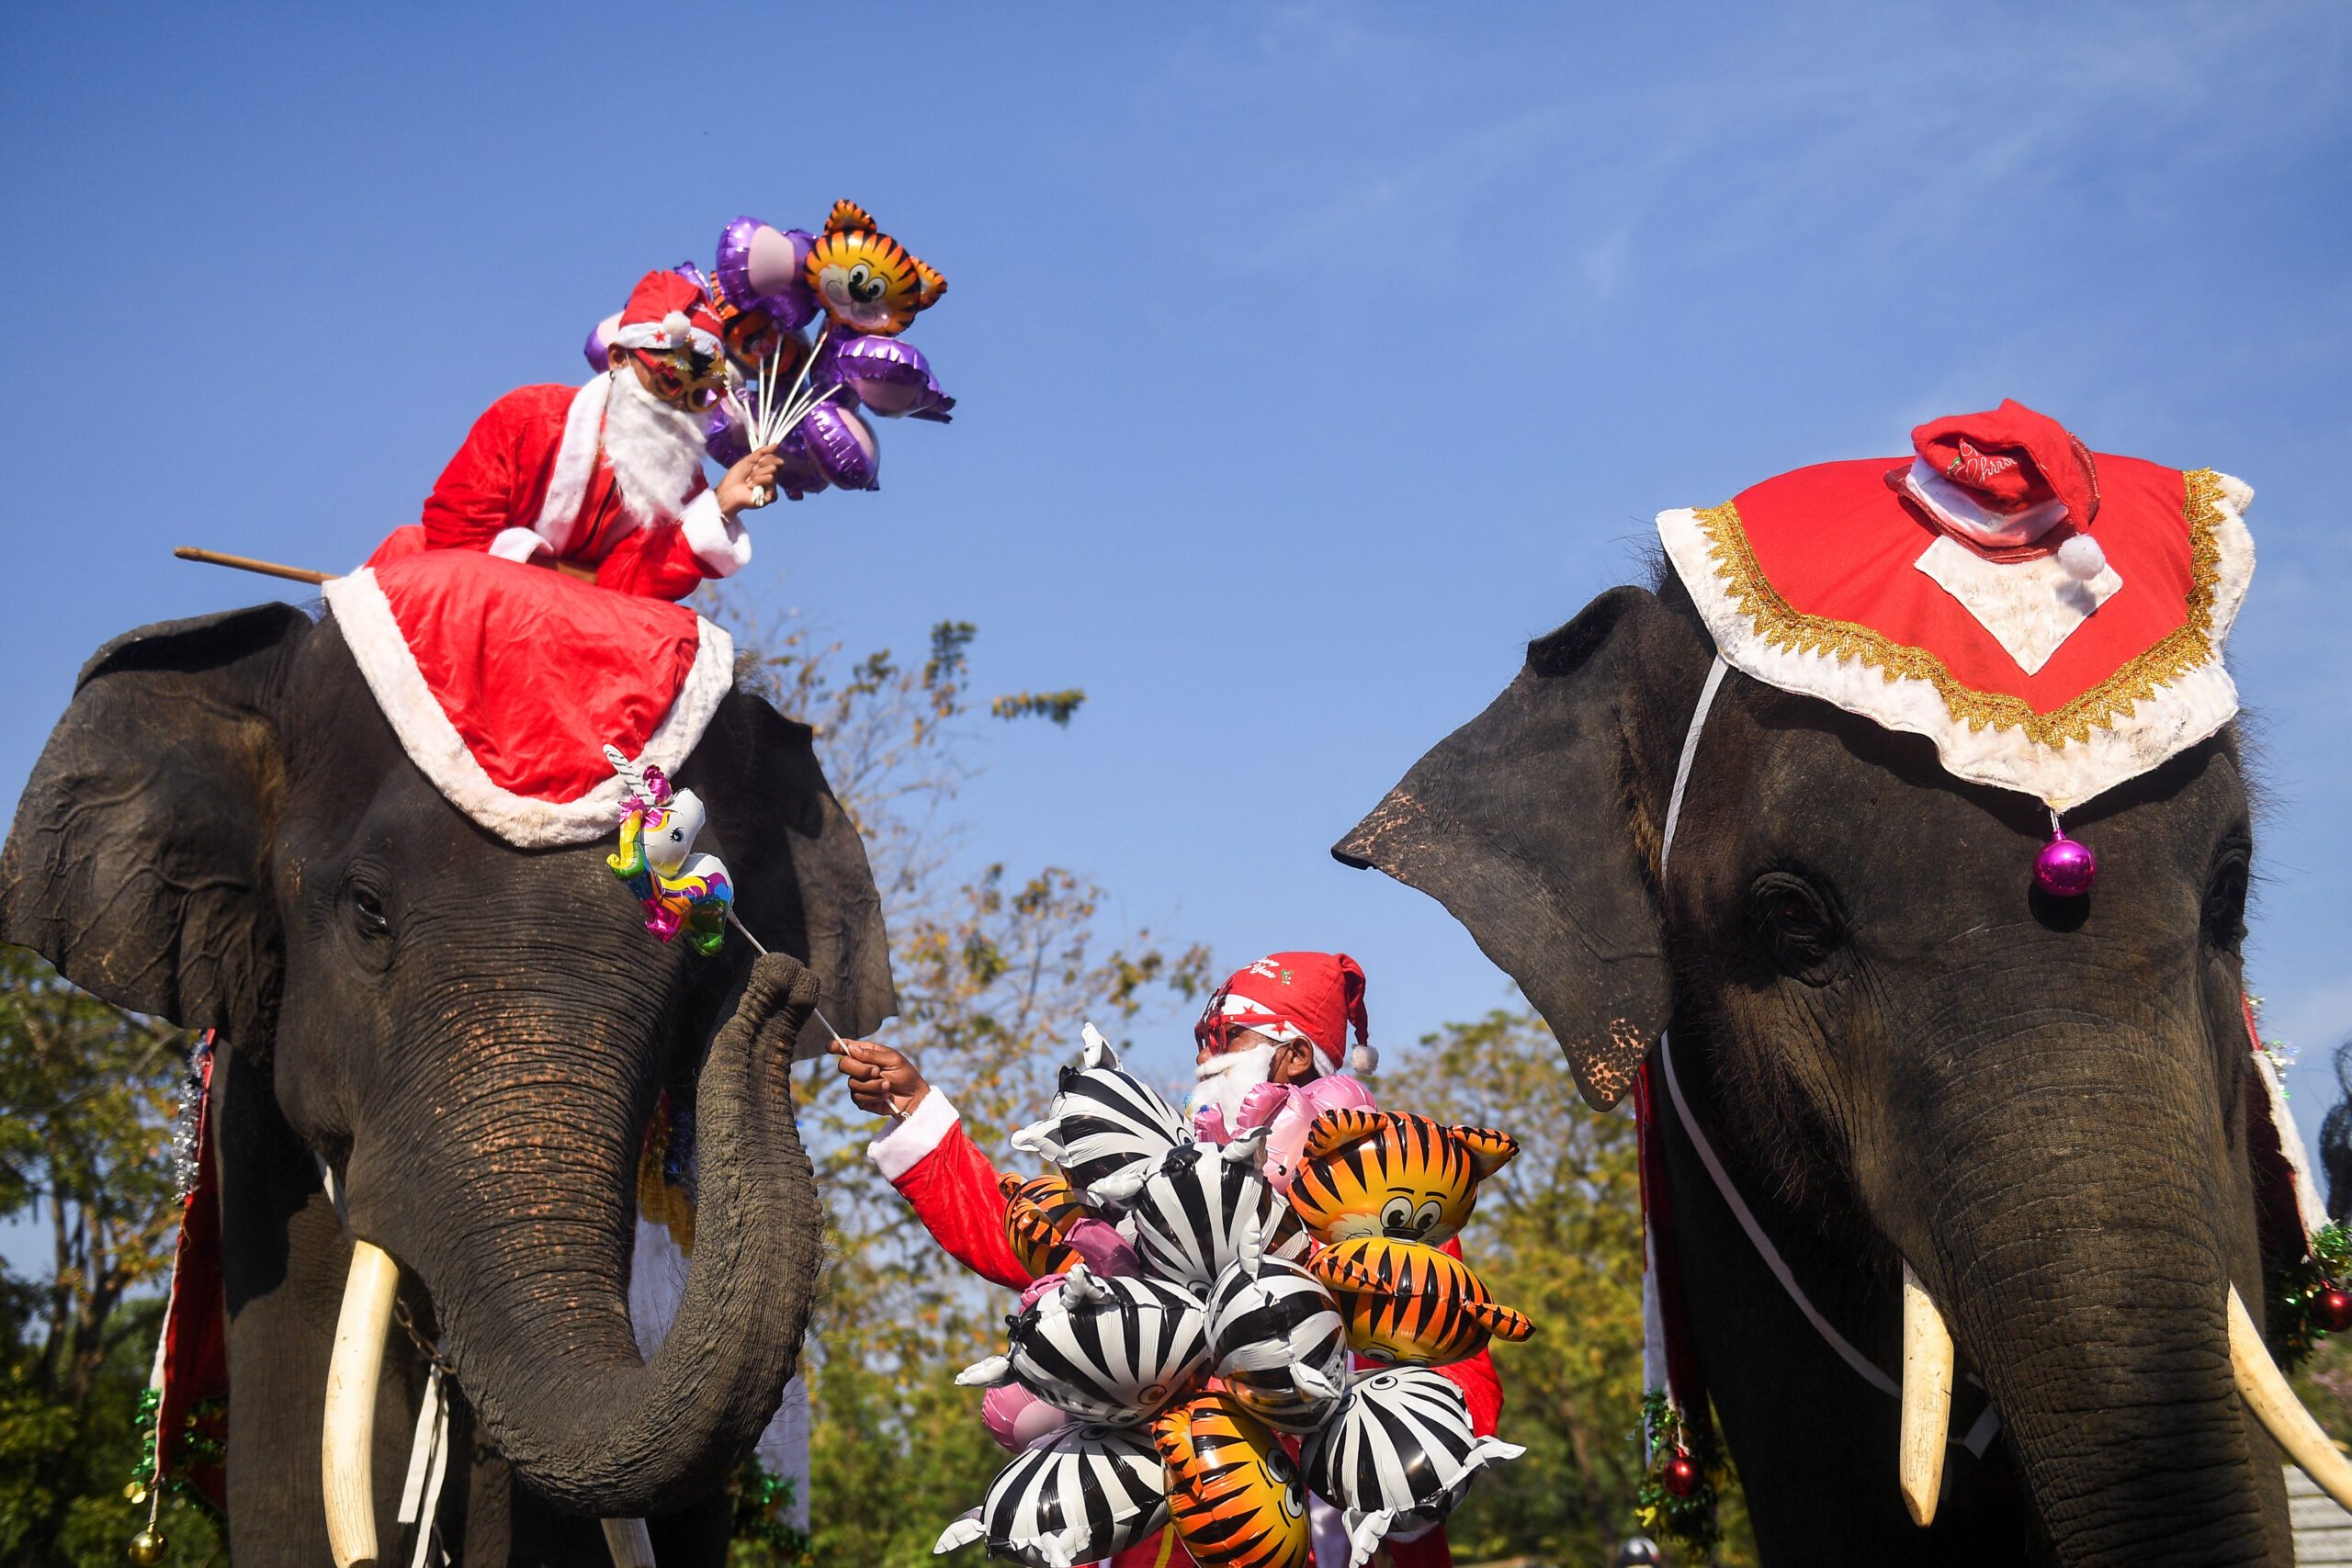 LOOK: In Thailand, Santa delivers presents on elephants